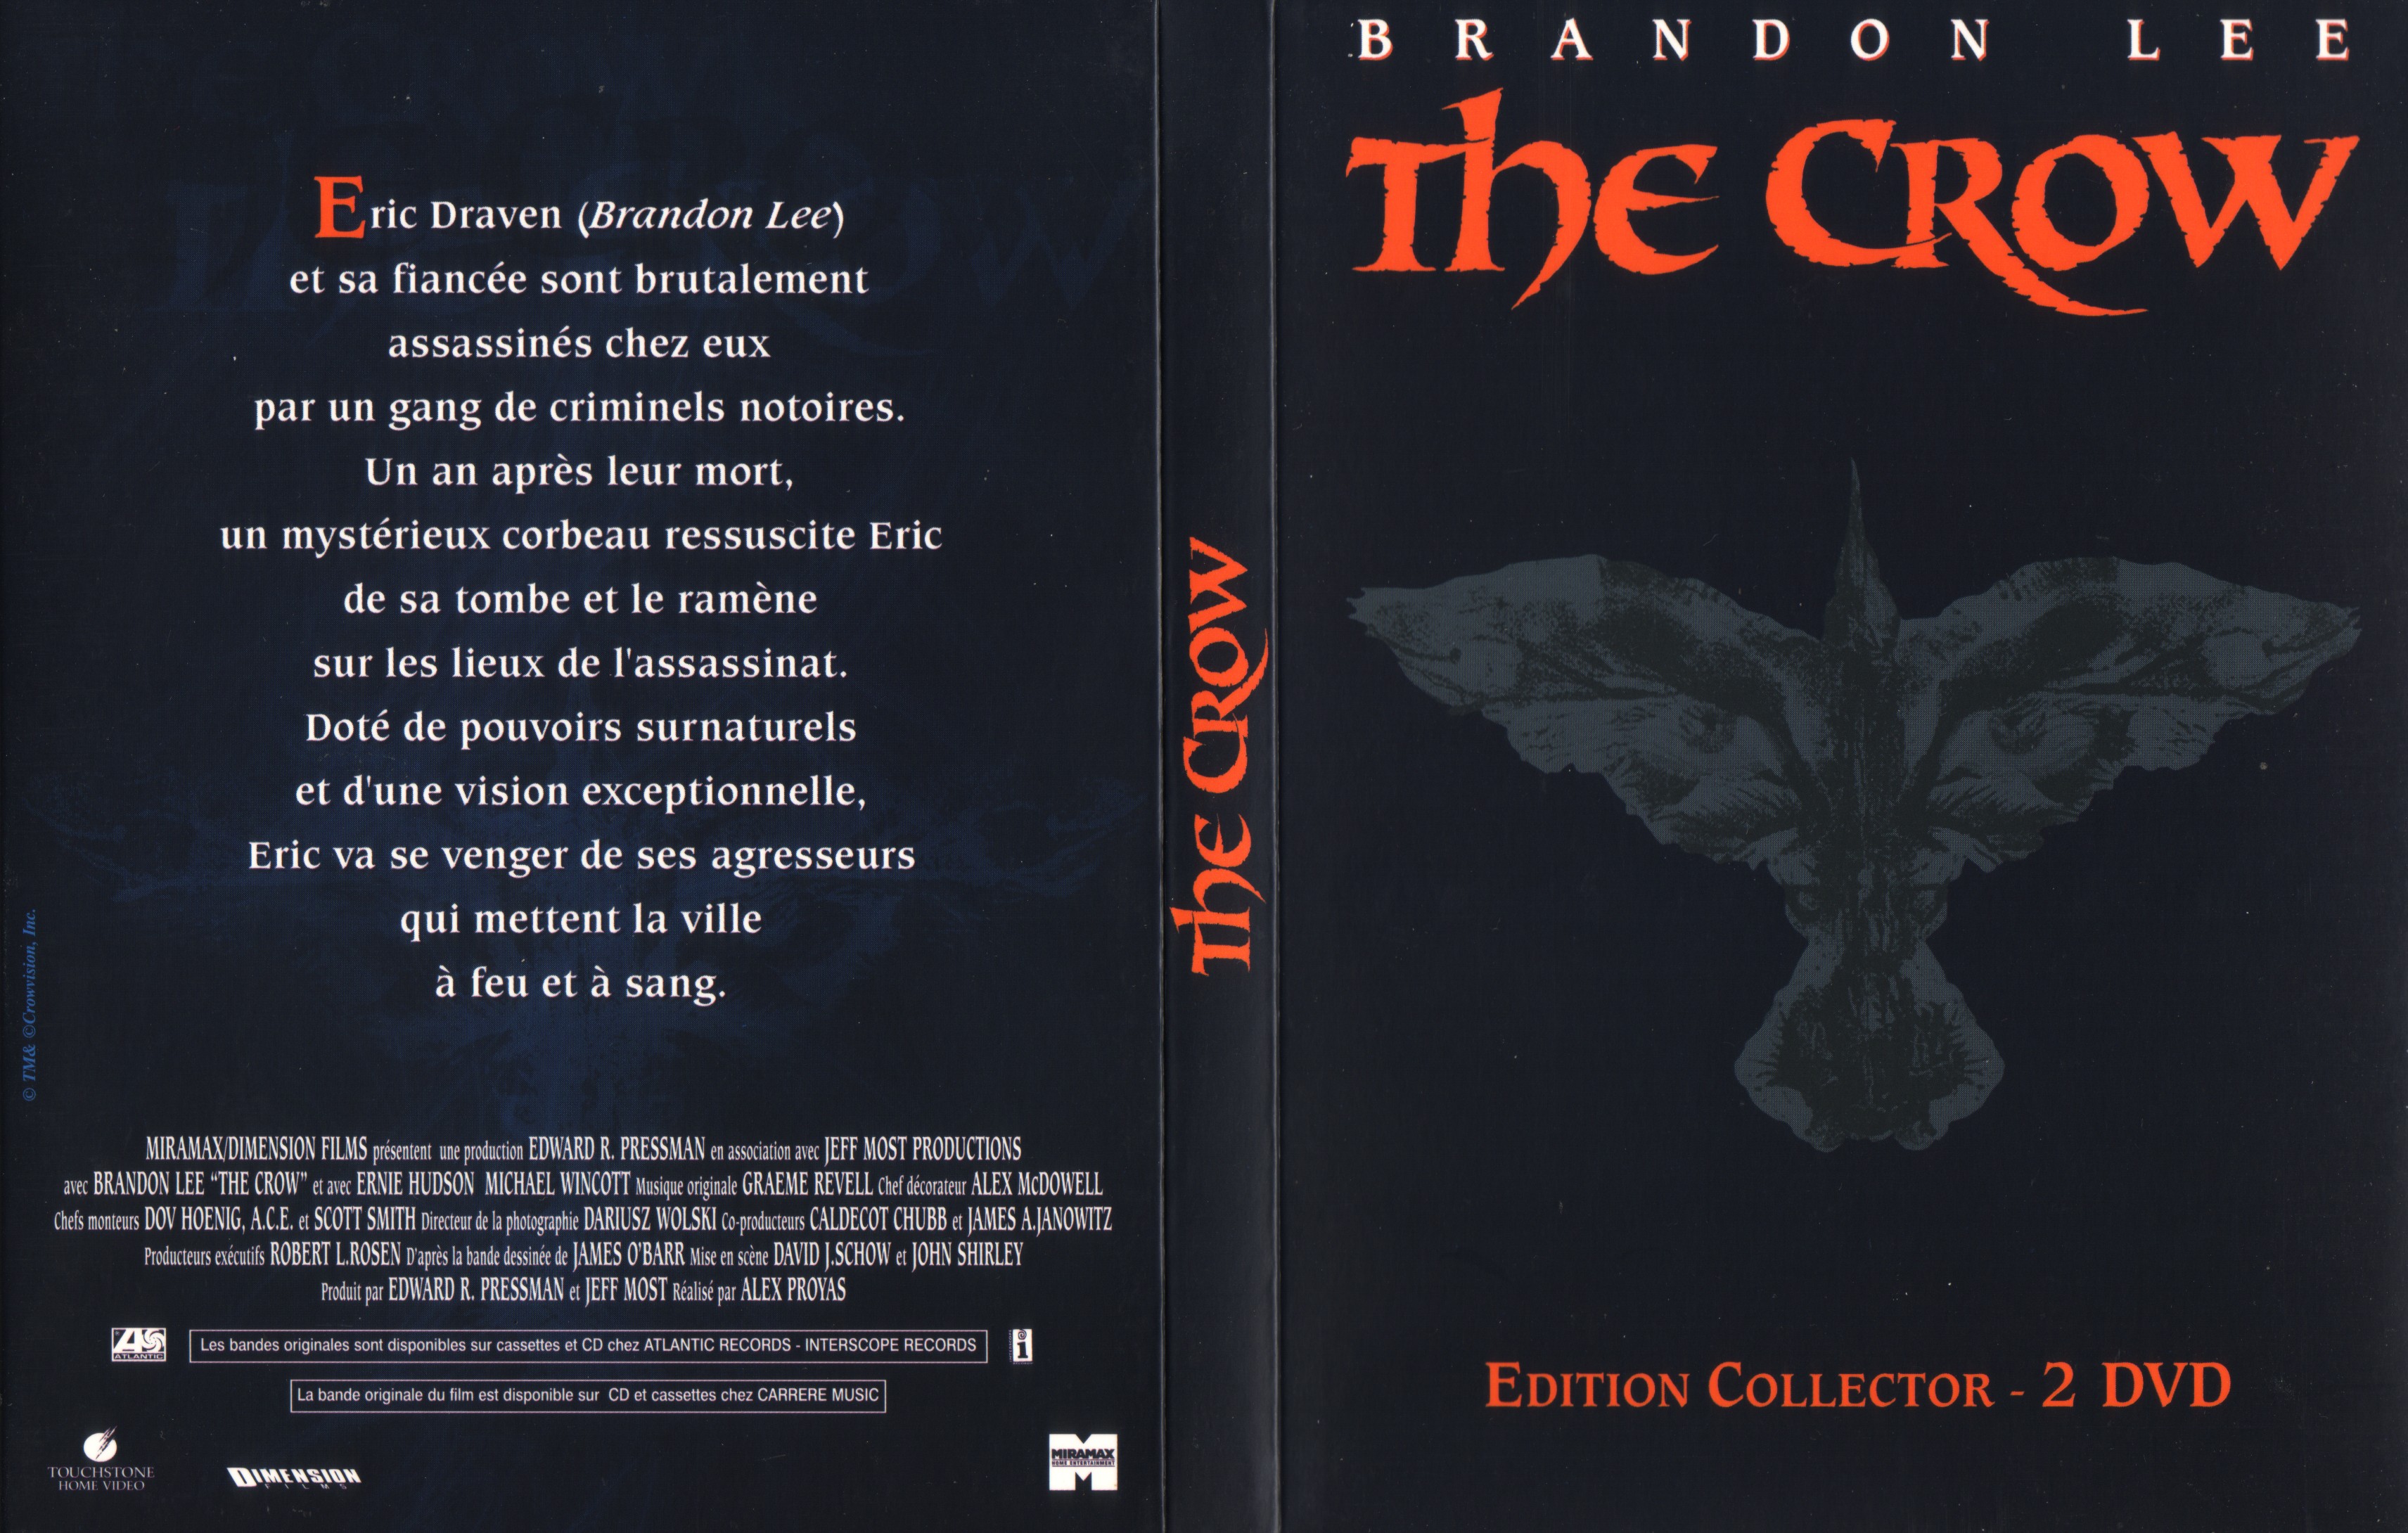 Jaquette DVD The crow v2